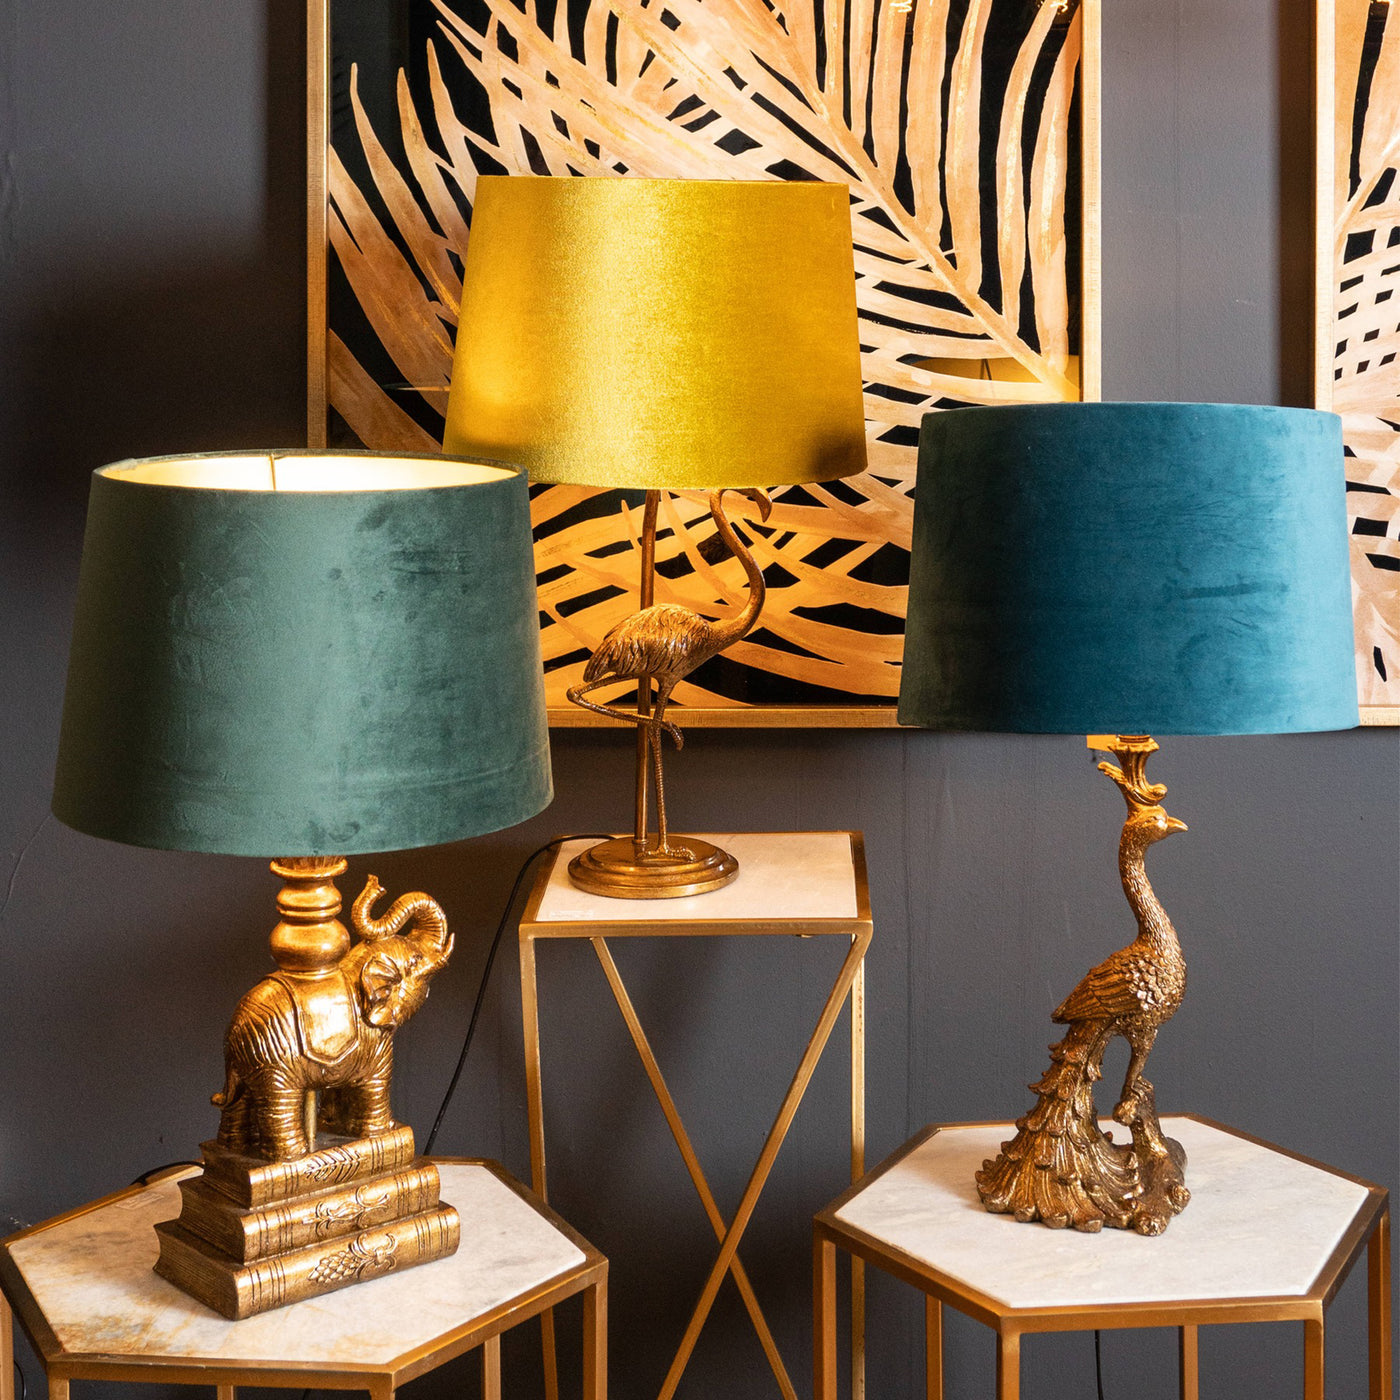 Exotica - Peacock Table Lamp Gold & Teal